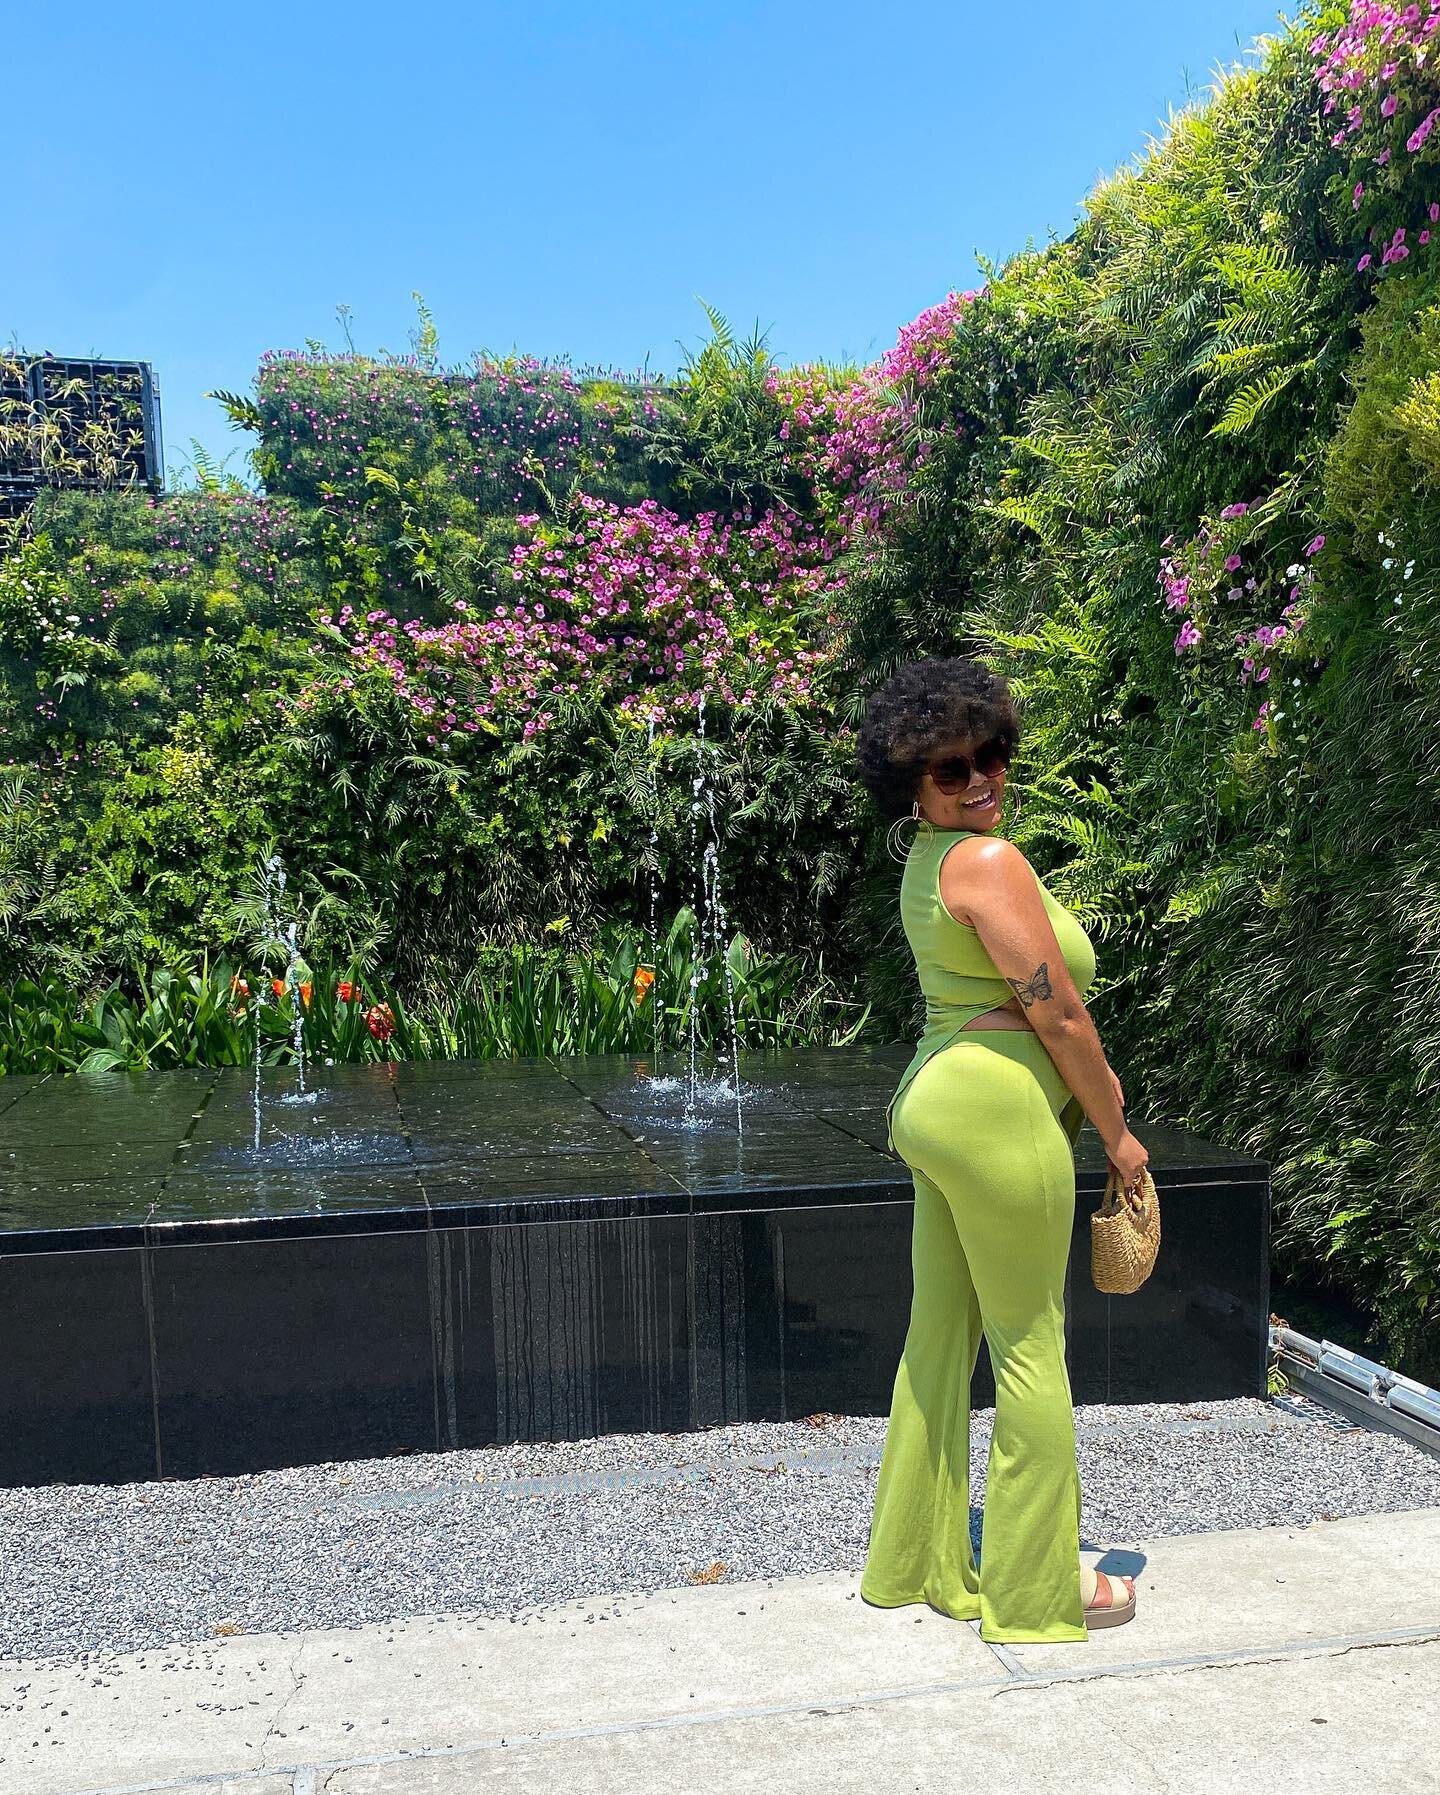 What happens when a work of art visits another work of art? ☀️I deeply enjoyed being surrounded by so much beautiful nature and artwork at New Orleans&rsquo; Botanical Garden in City Park. This was the type of place you could literally feel the magic